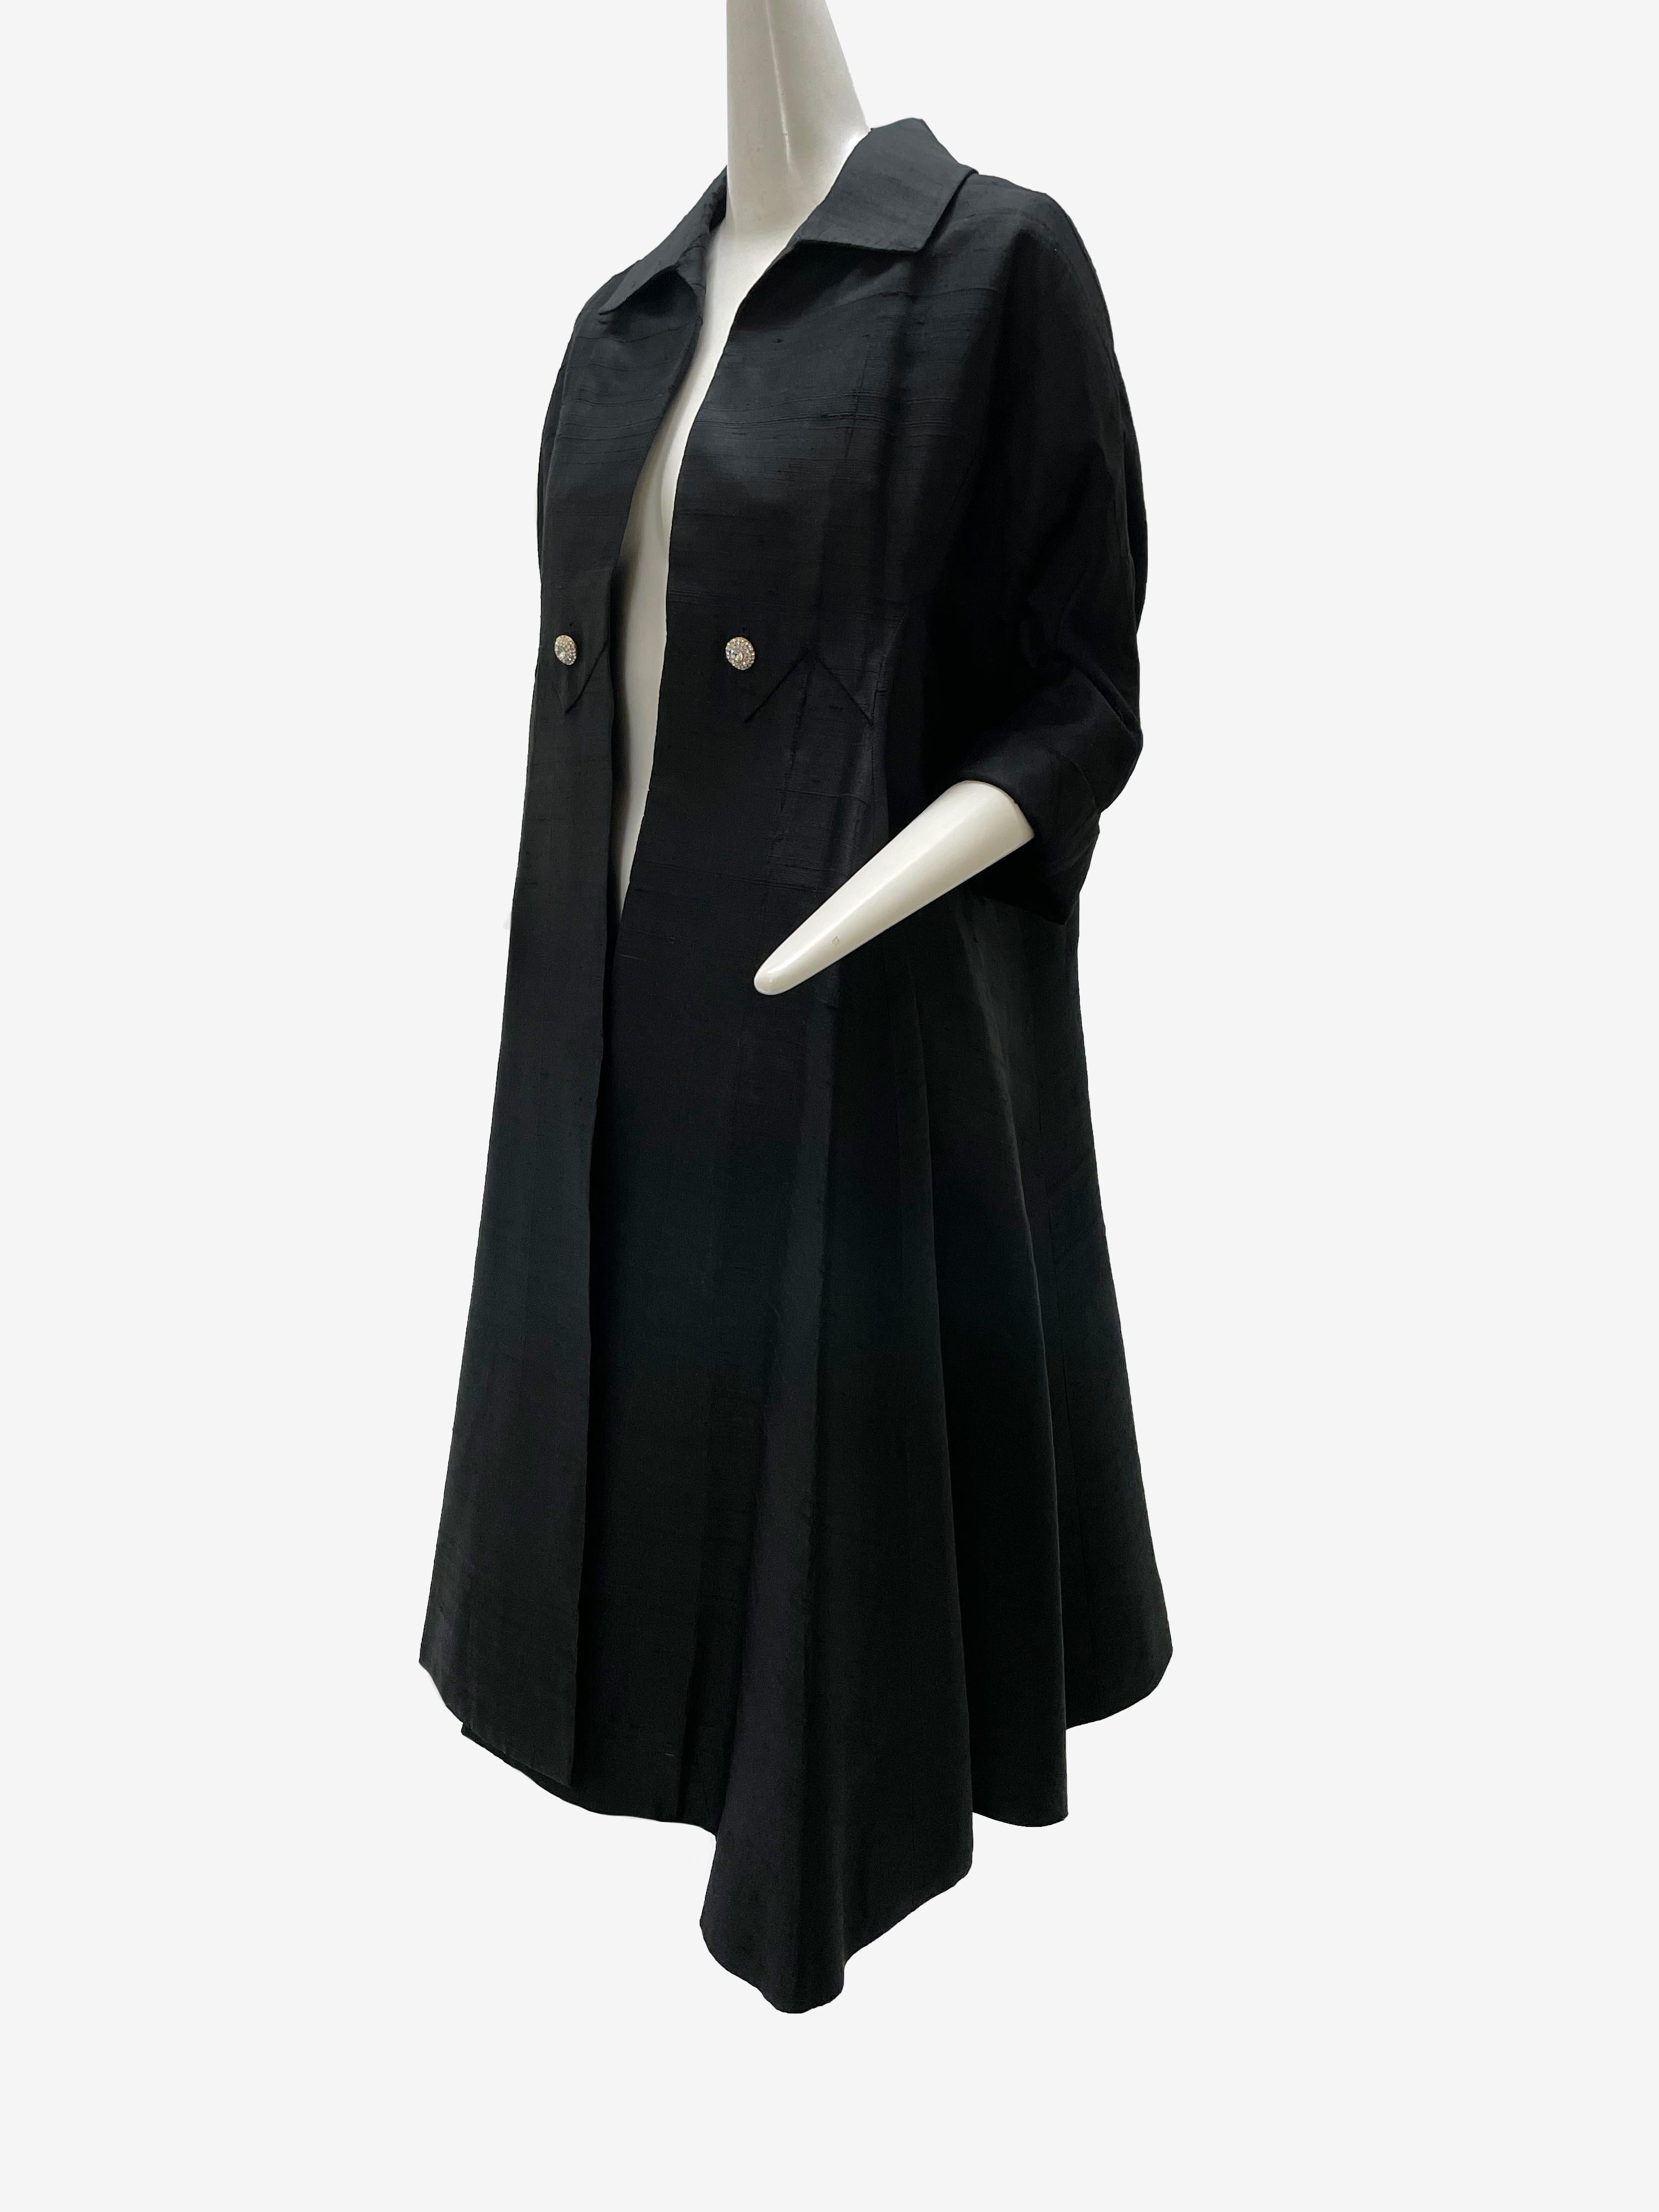 1952 Christian Dior Spring/Summer Couture Black Dupioni Silk Opera Swing Coat In Excellent Condition In Gresham, OR